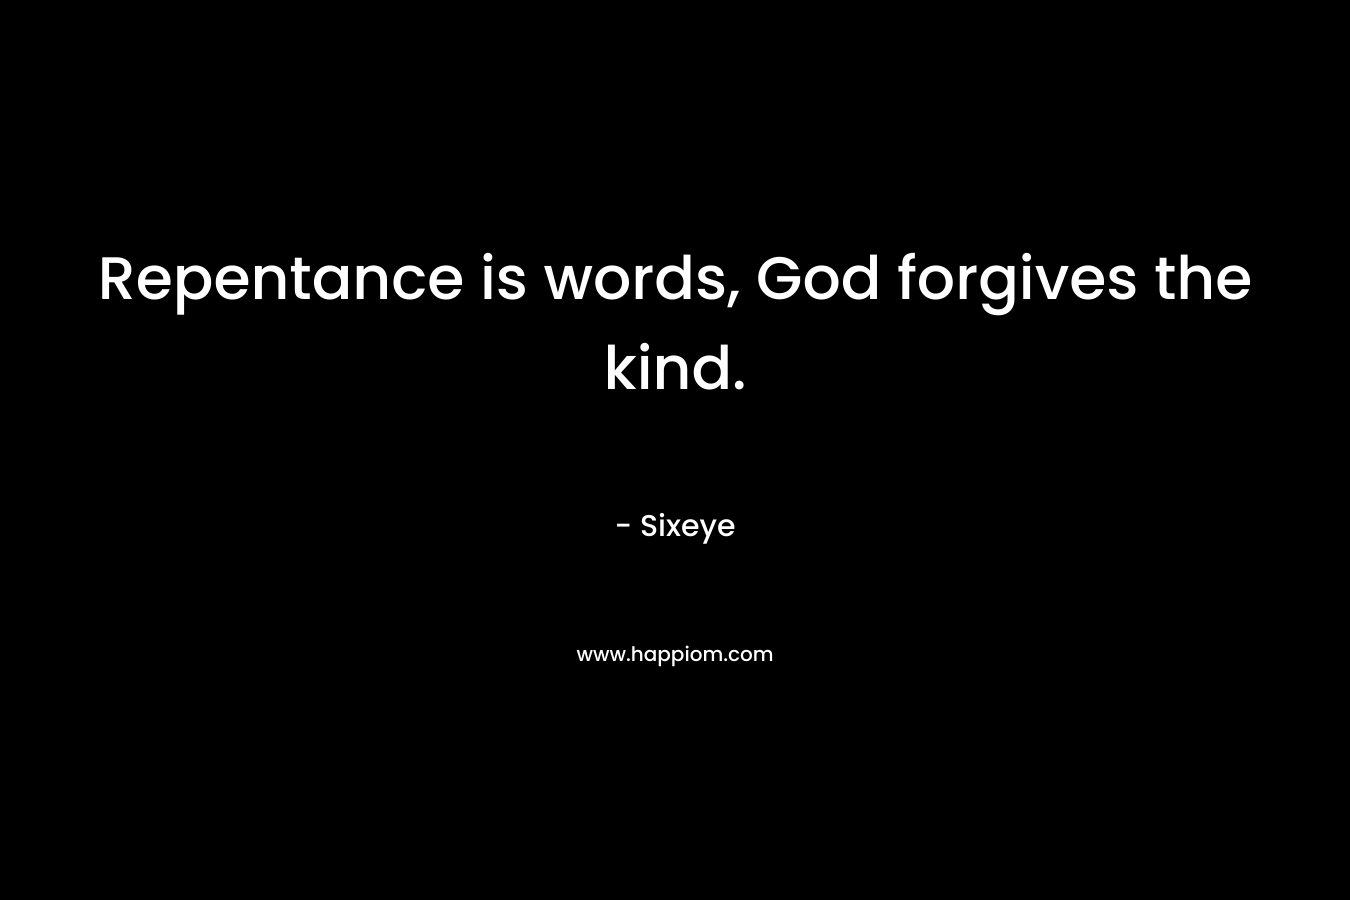 Repentance is words, God forgives the kind. – Sixeye